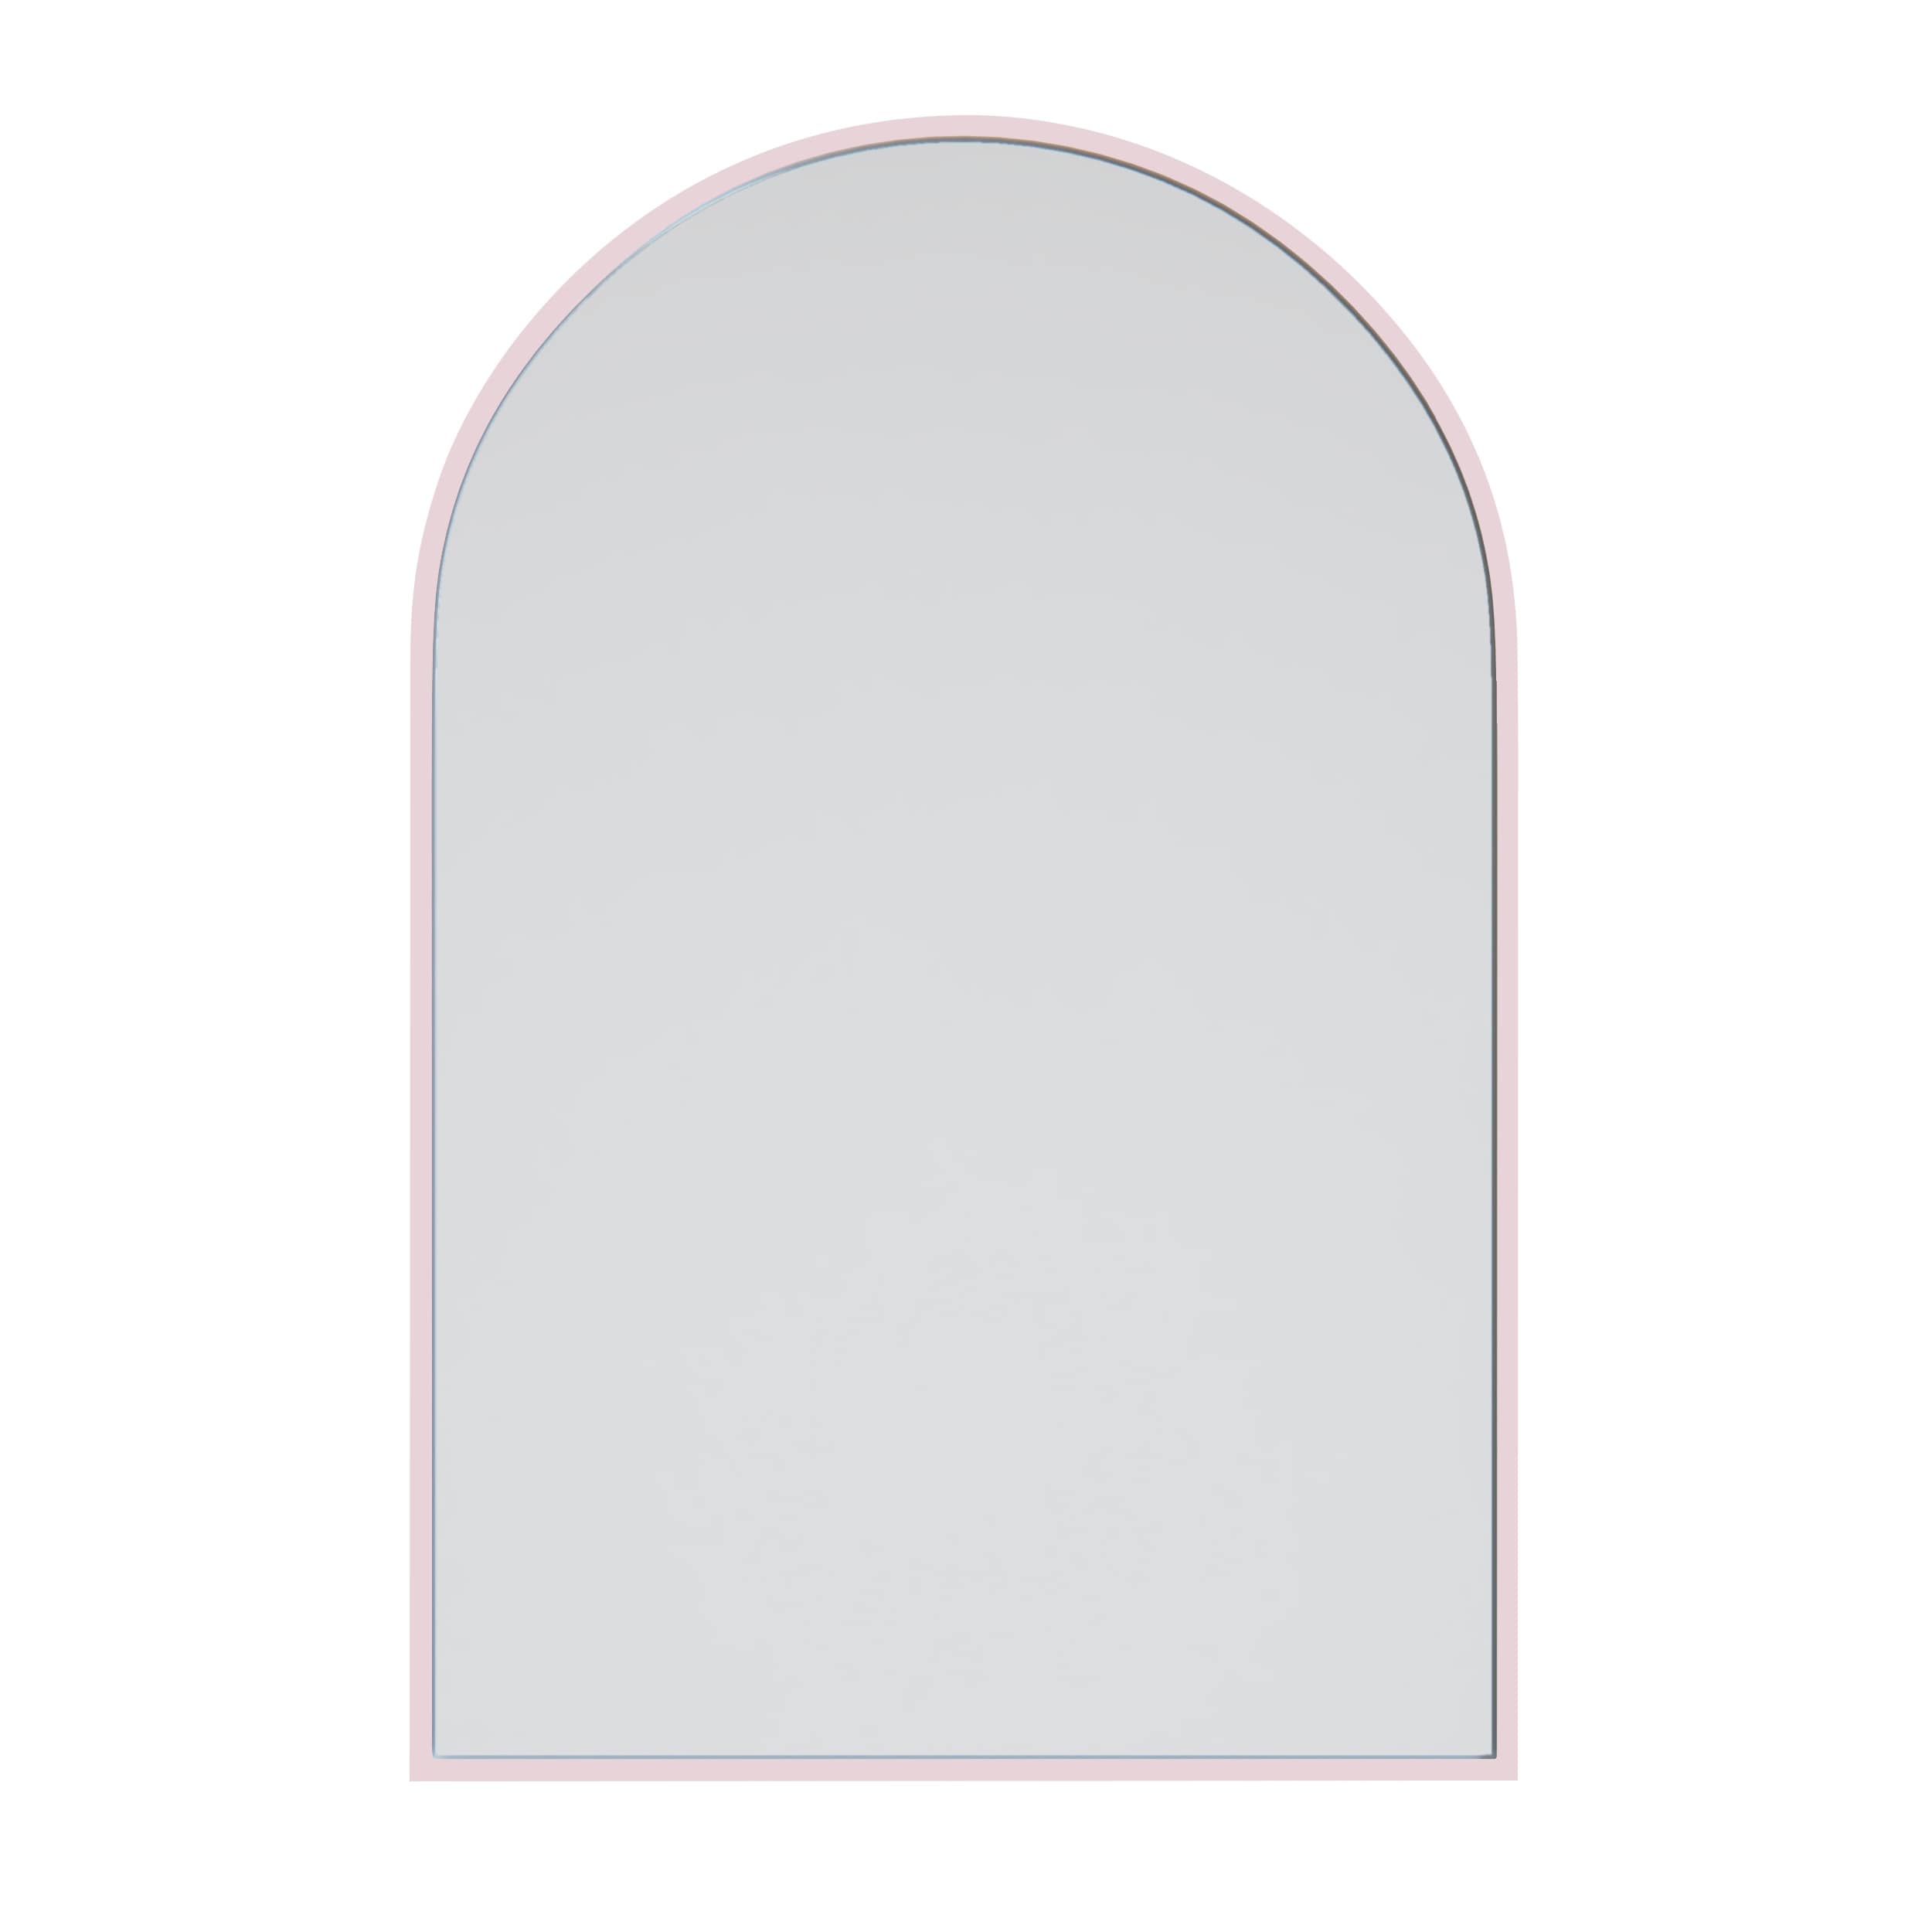 Glass Warehouse Arched Stainless Steel Wall Mirror - Overstock - 33171415